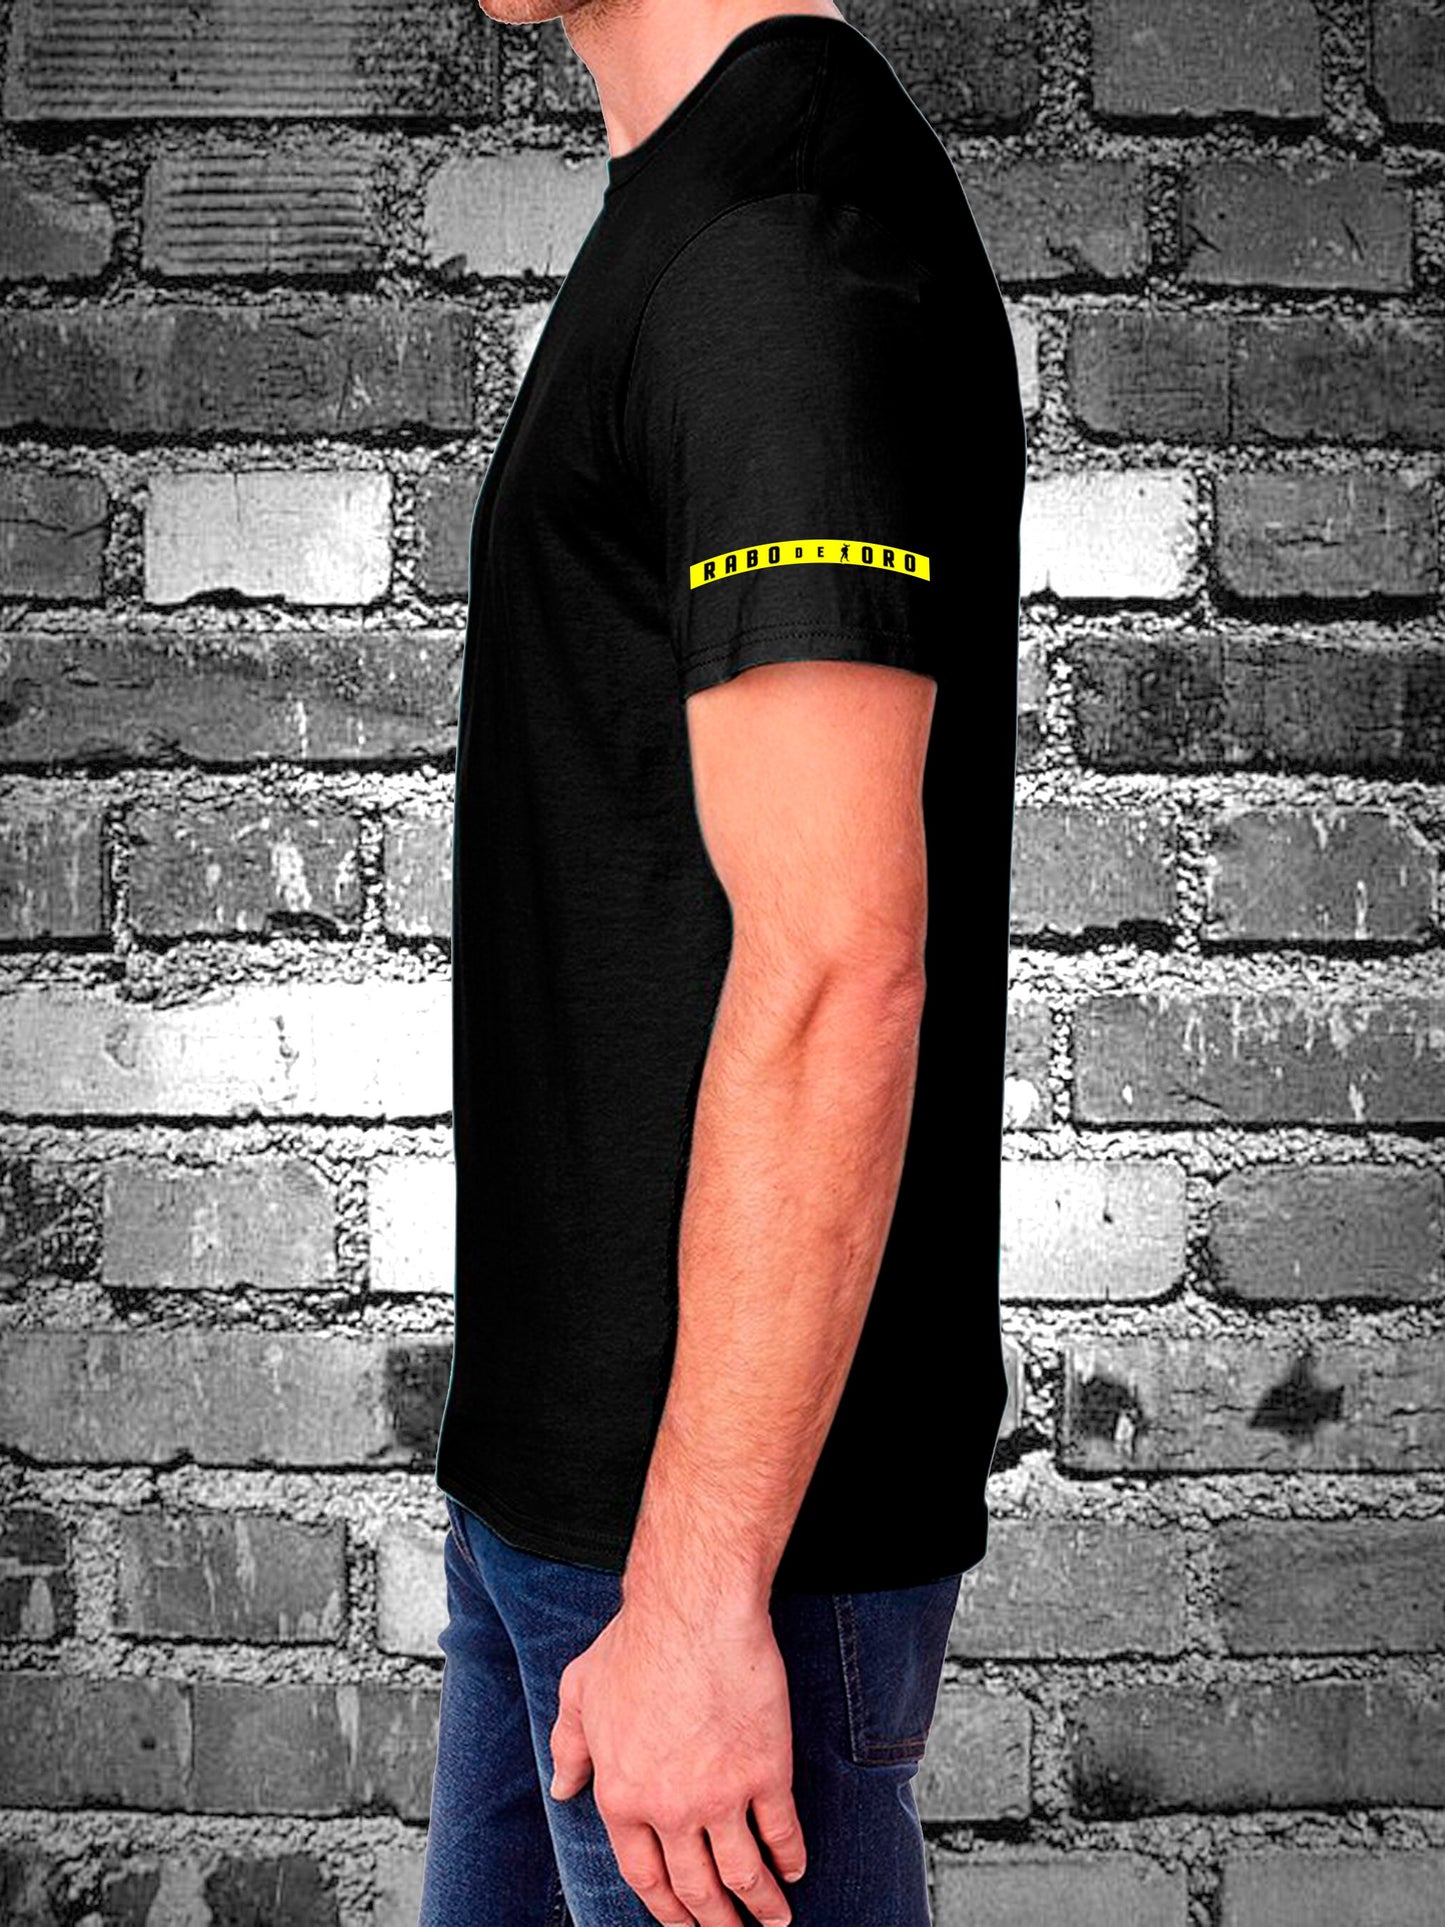 TOP - Black T-Shirt with BDSM Hanky Code details